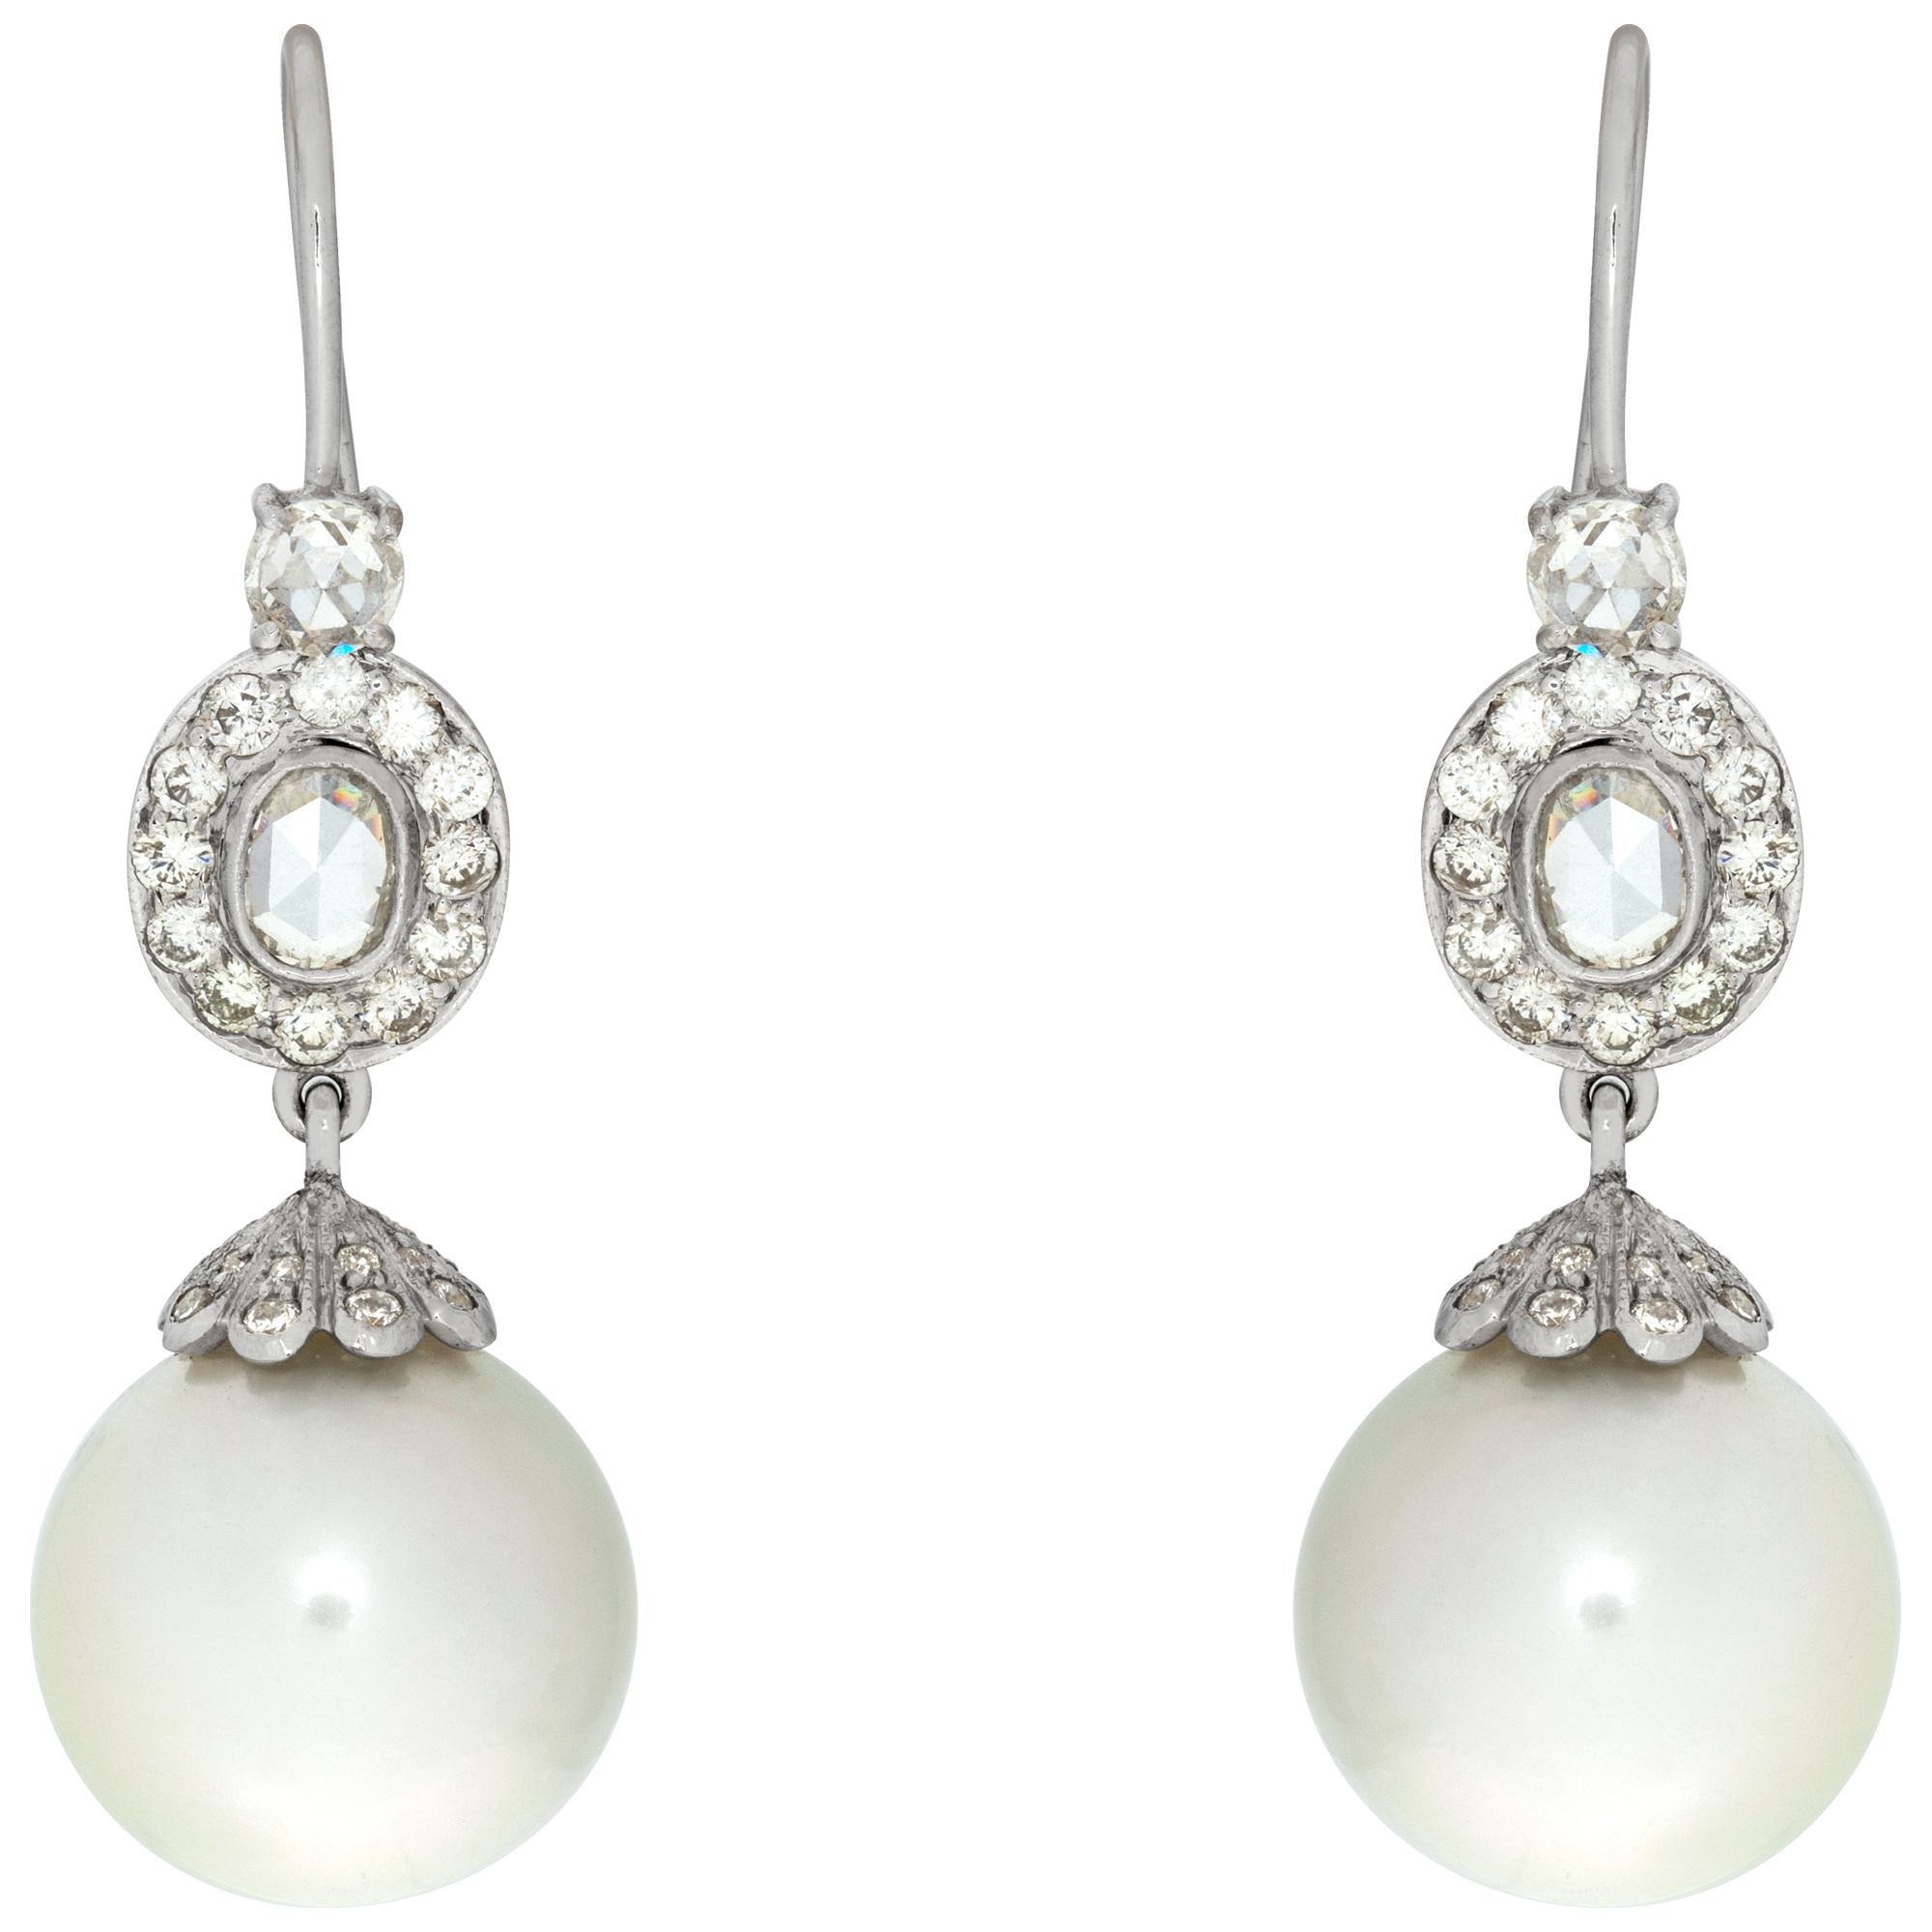 18k white gold diamond and pearl earrings with 1.66 carats in G-H color, VS clarity diamonds